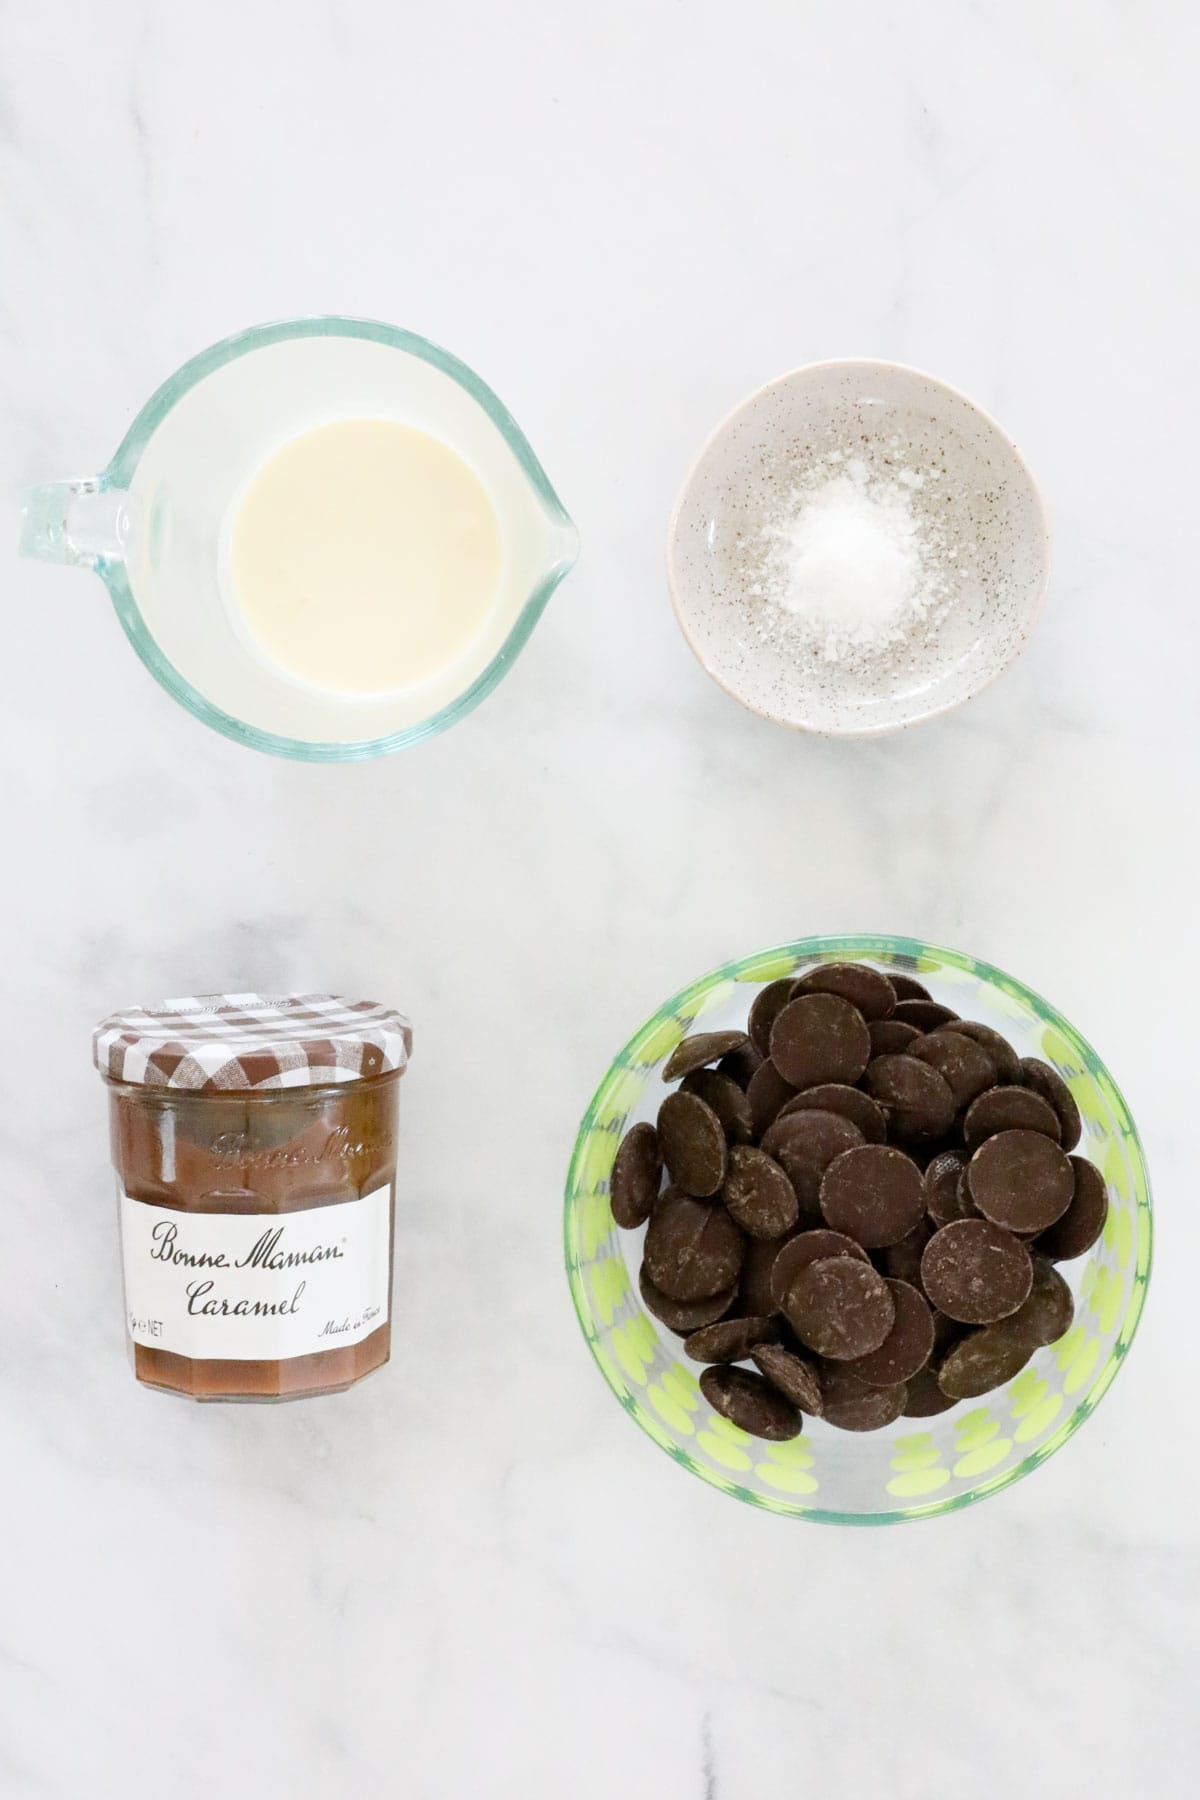 The four ingredients needed to make the truffles placed in individual bowls.